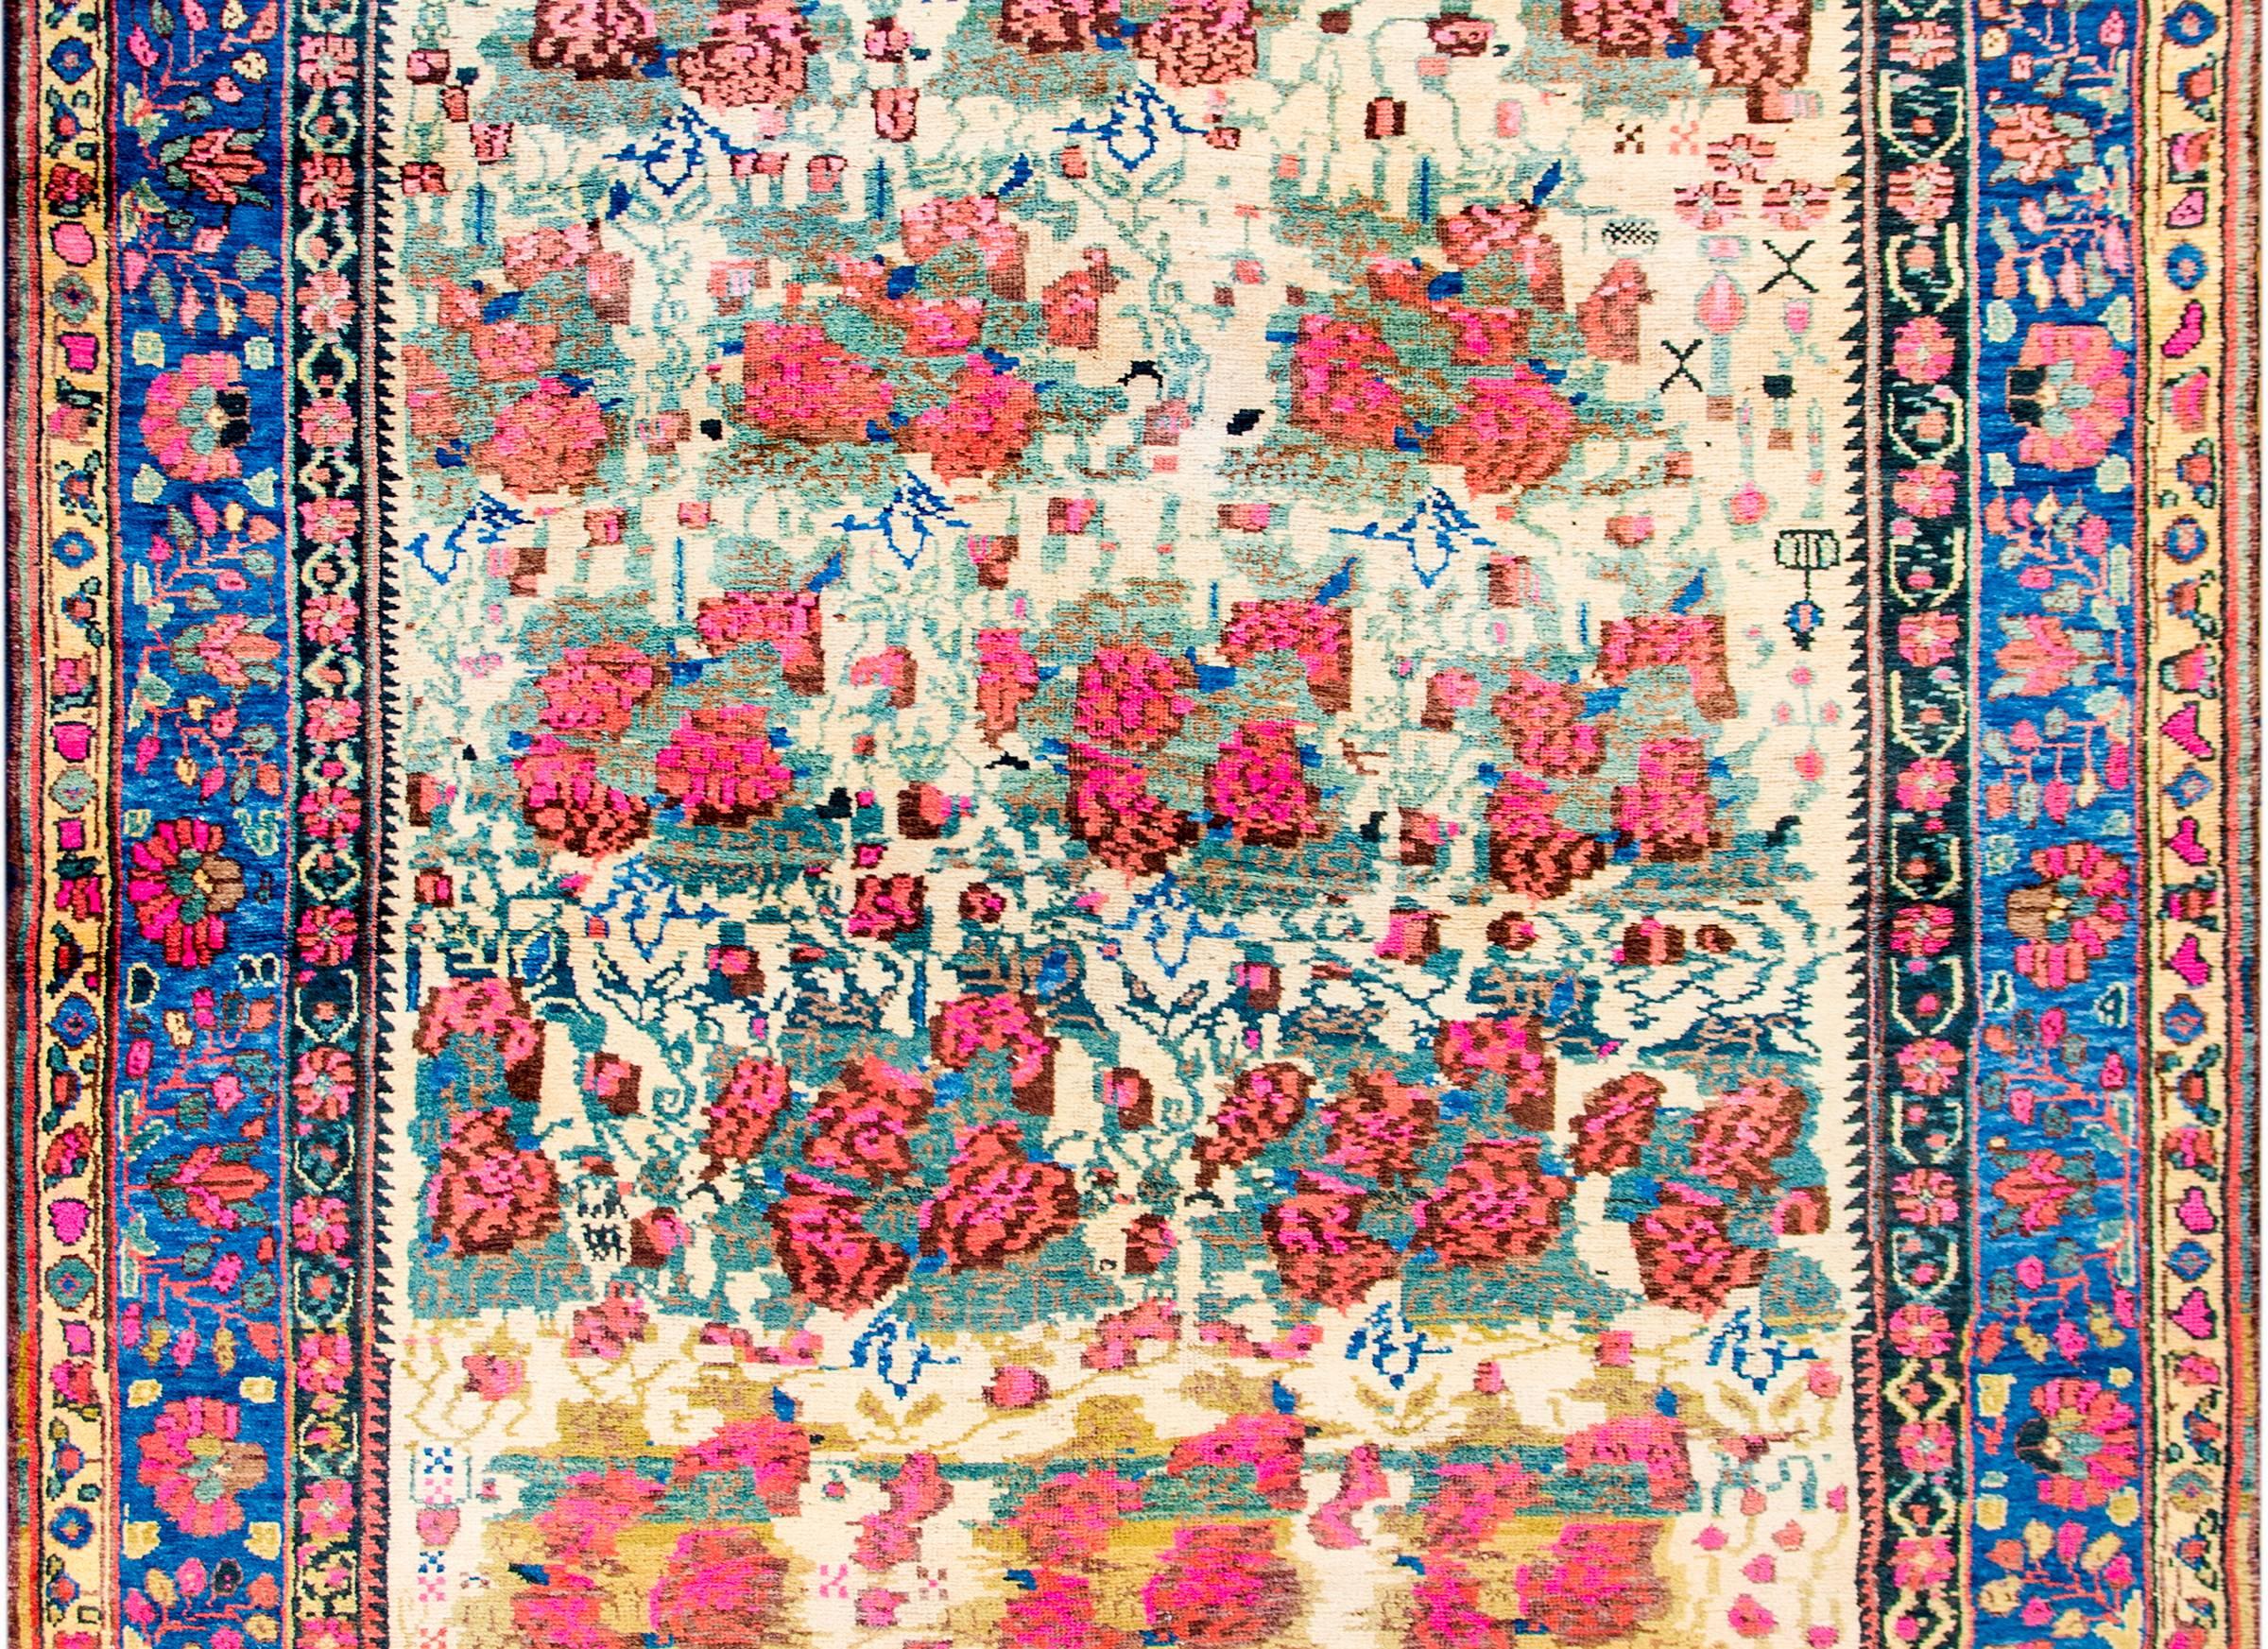 A wonderful mid-20th century Persian Afshar rug with a beautifully woven pattern of bright pink flower clusters, amidst a field of vines and myriad flowers on a cream colored background. The border is complex with multiple floral and vine patterned